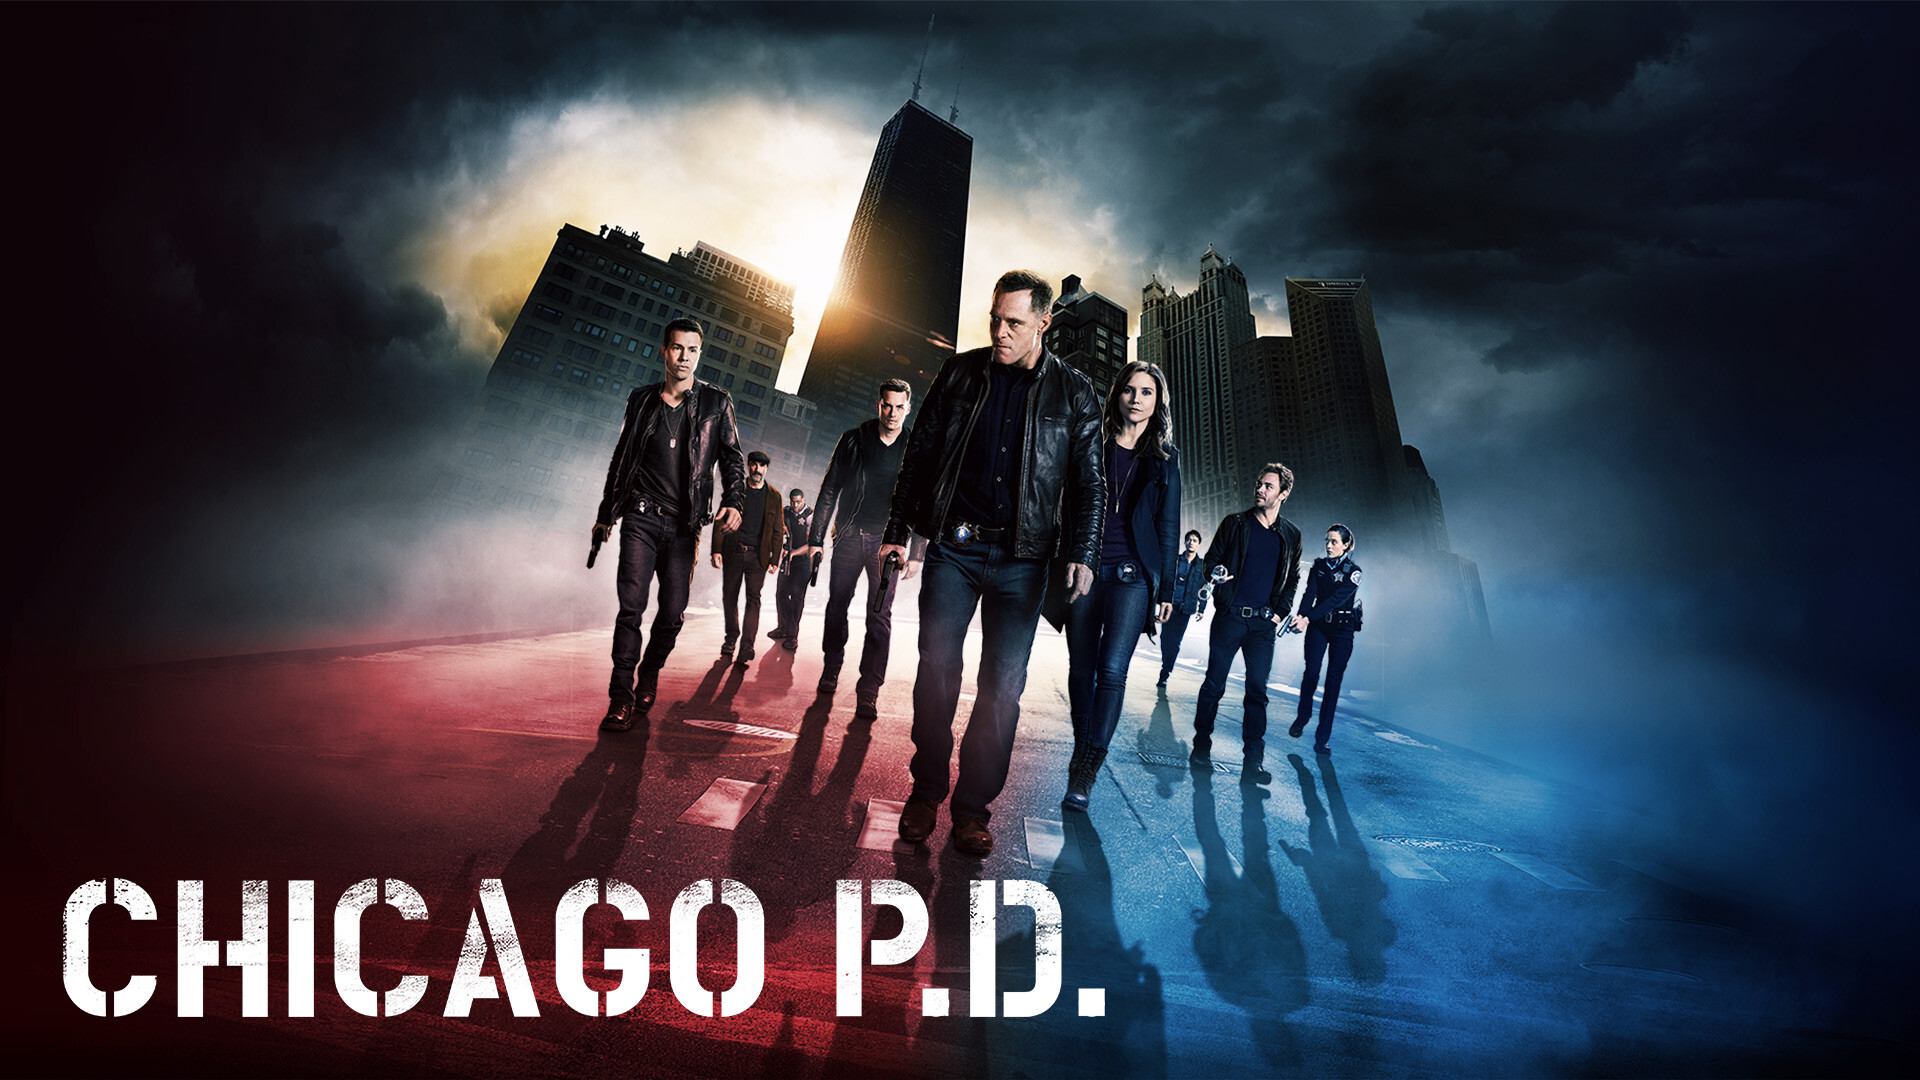 Chicago P.D. (TV Series): The Intelligence Unit Of The 21st District Of The Police Department. 1920x1080 Full HD Wallpaper.